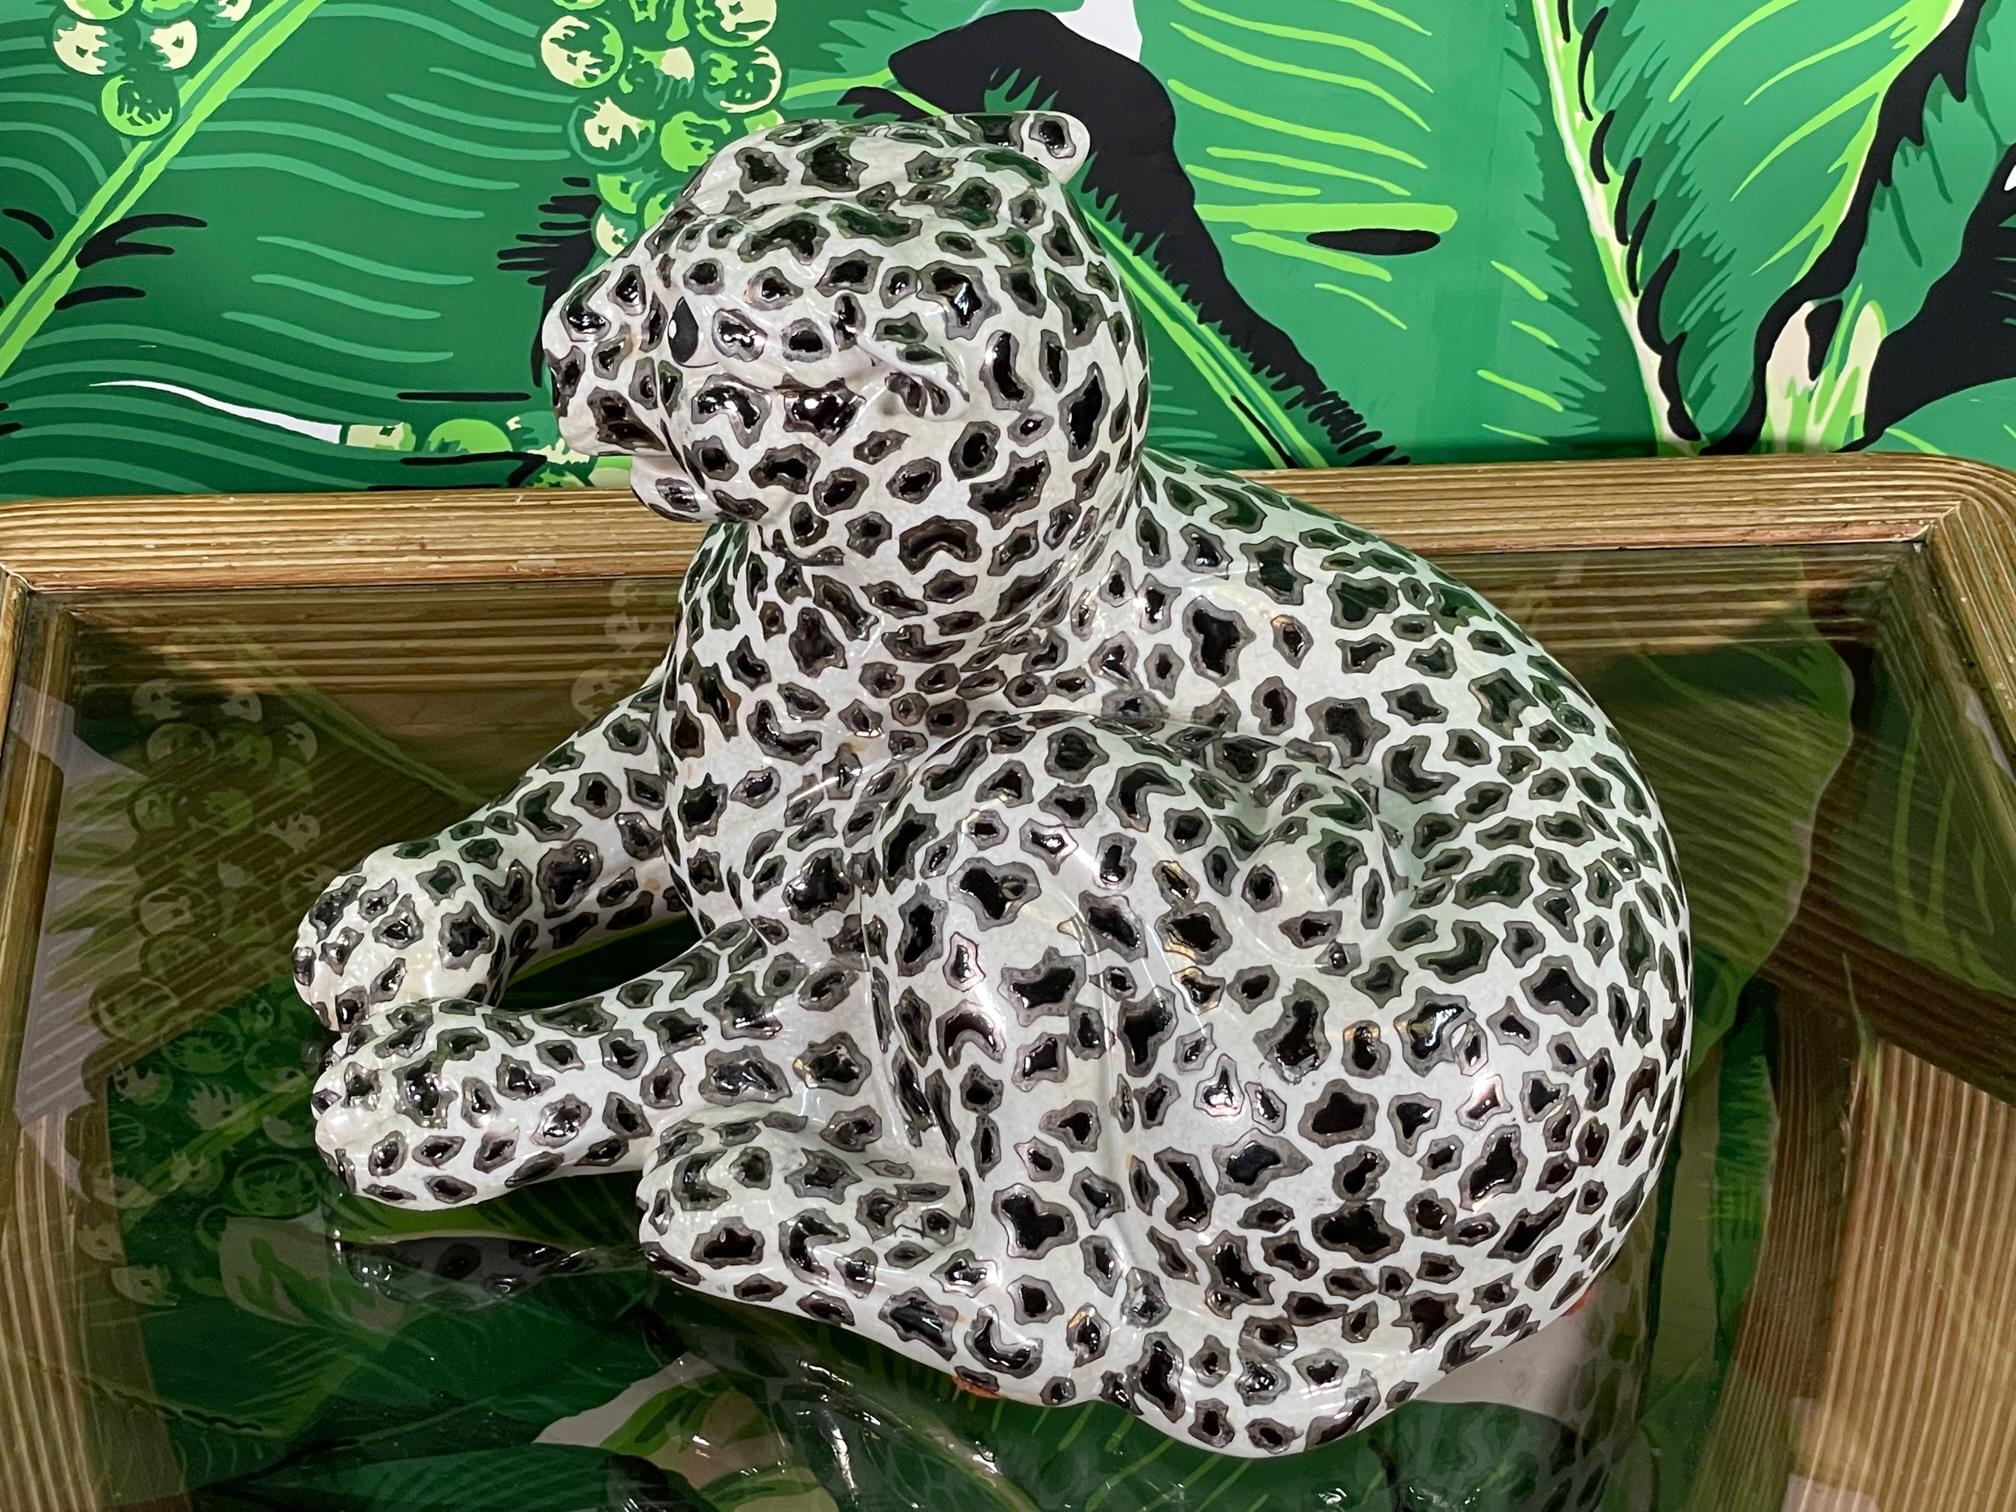 Porcelain leopard figurine features silver leaf accents and a glossy glazed finish. Marked 